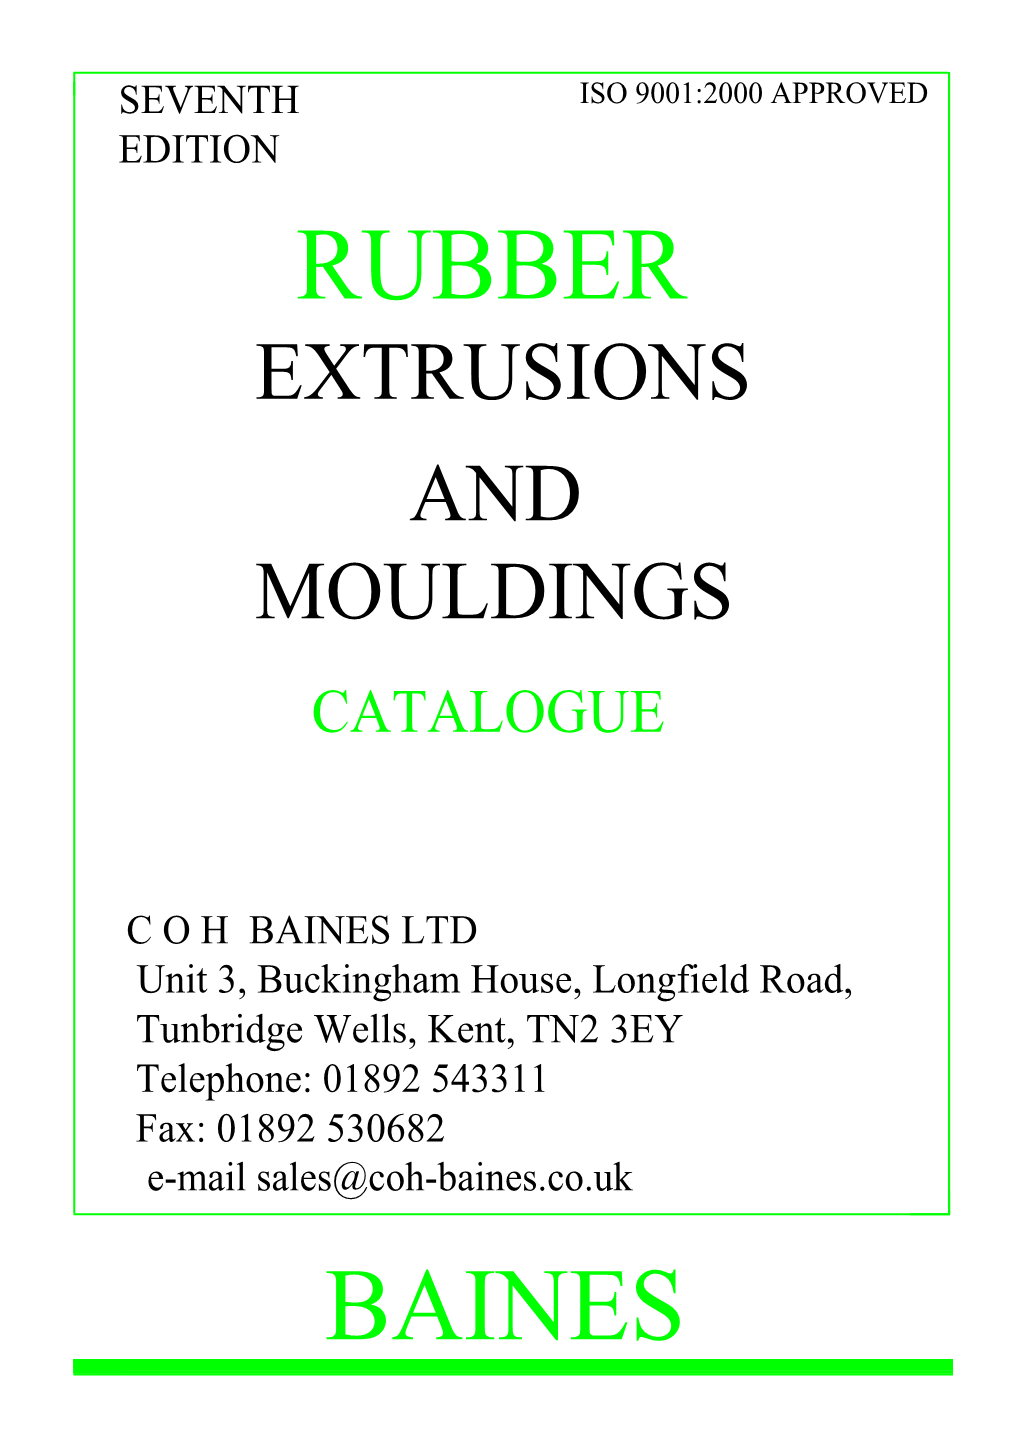 Rubber Extrusions and Mouldings Catalogue